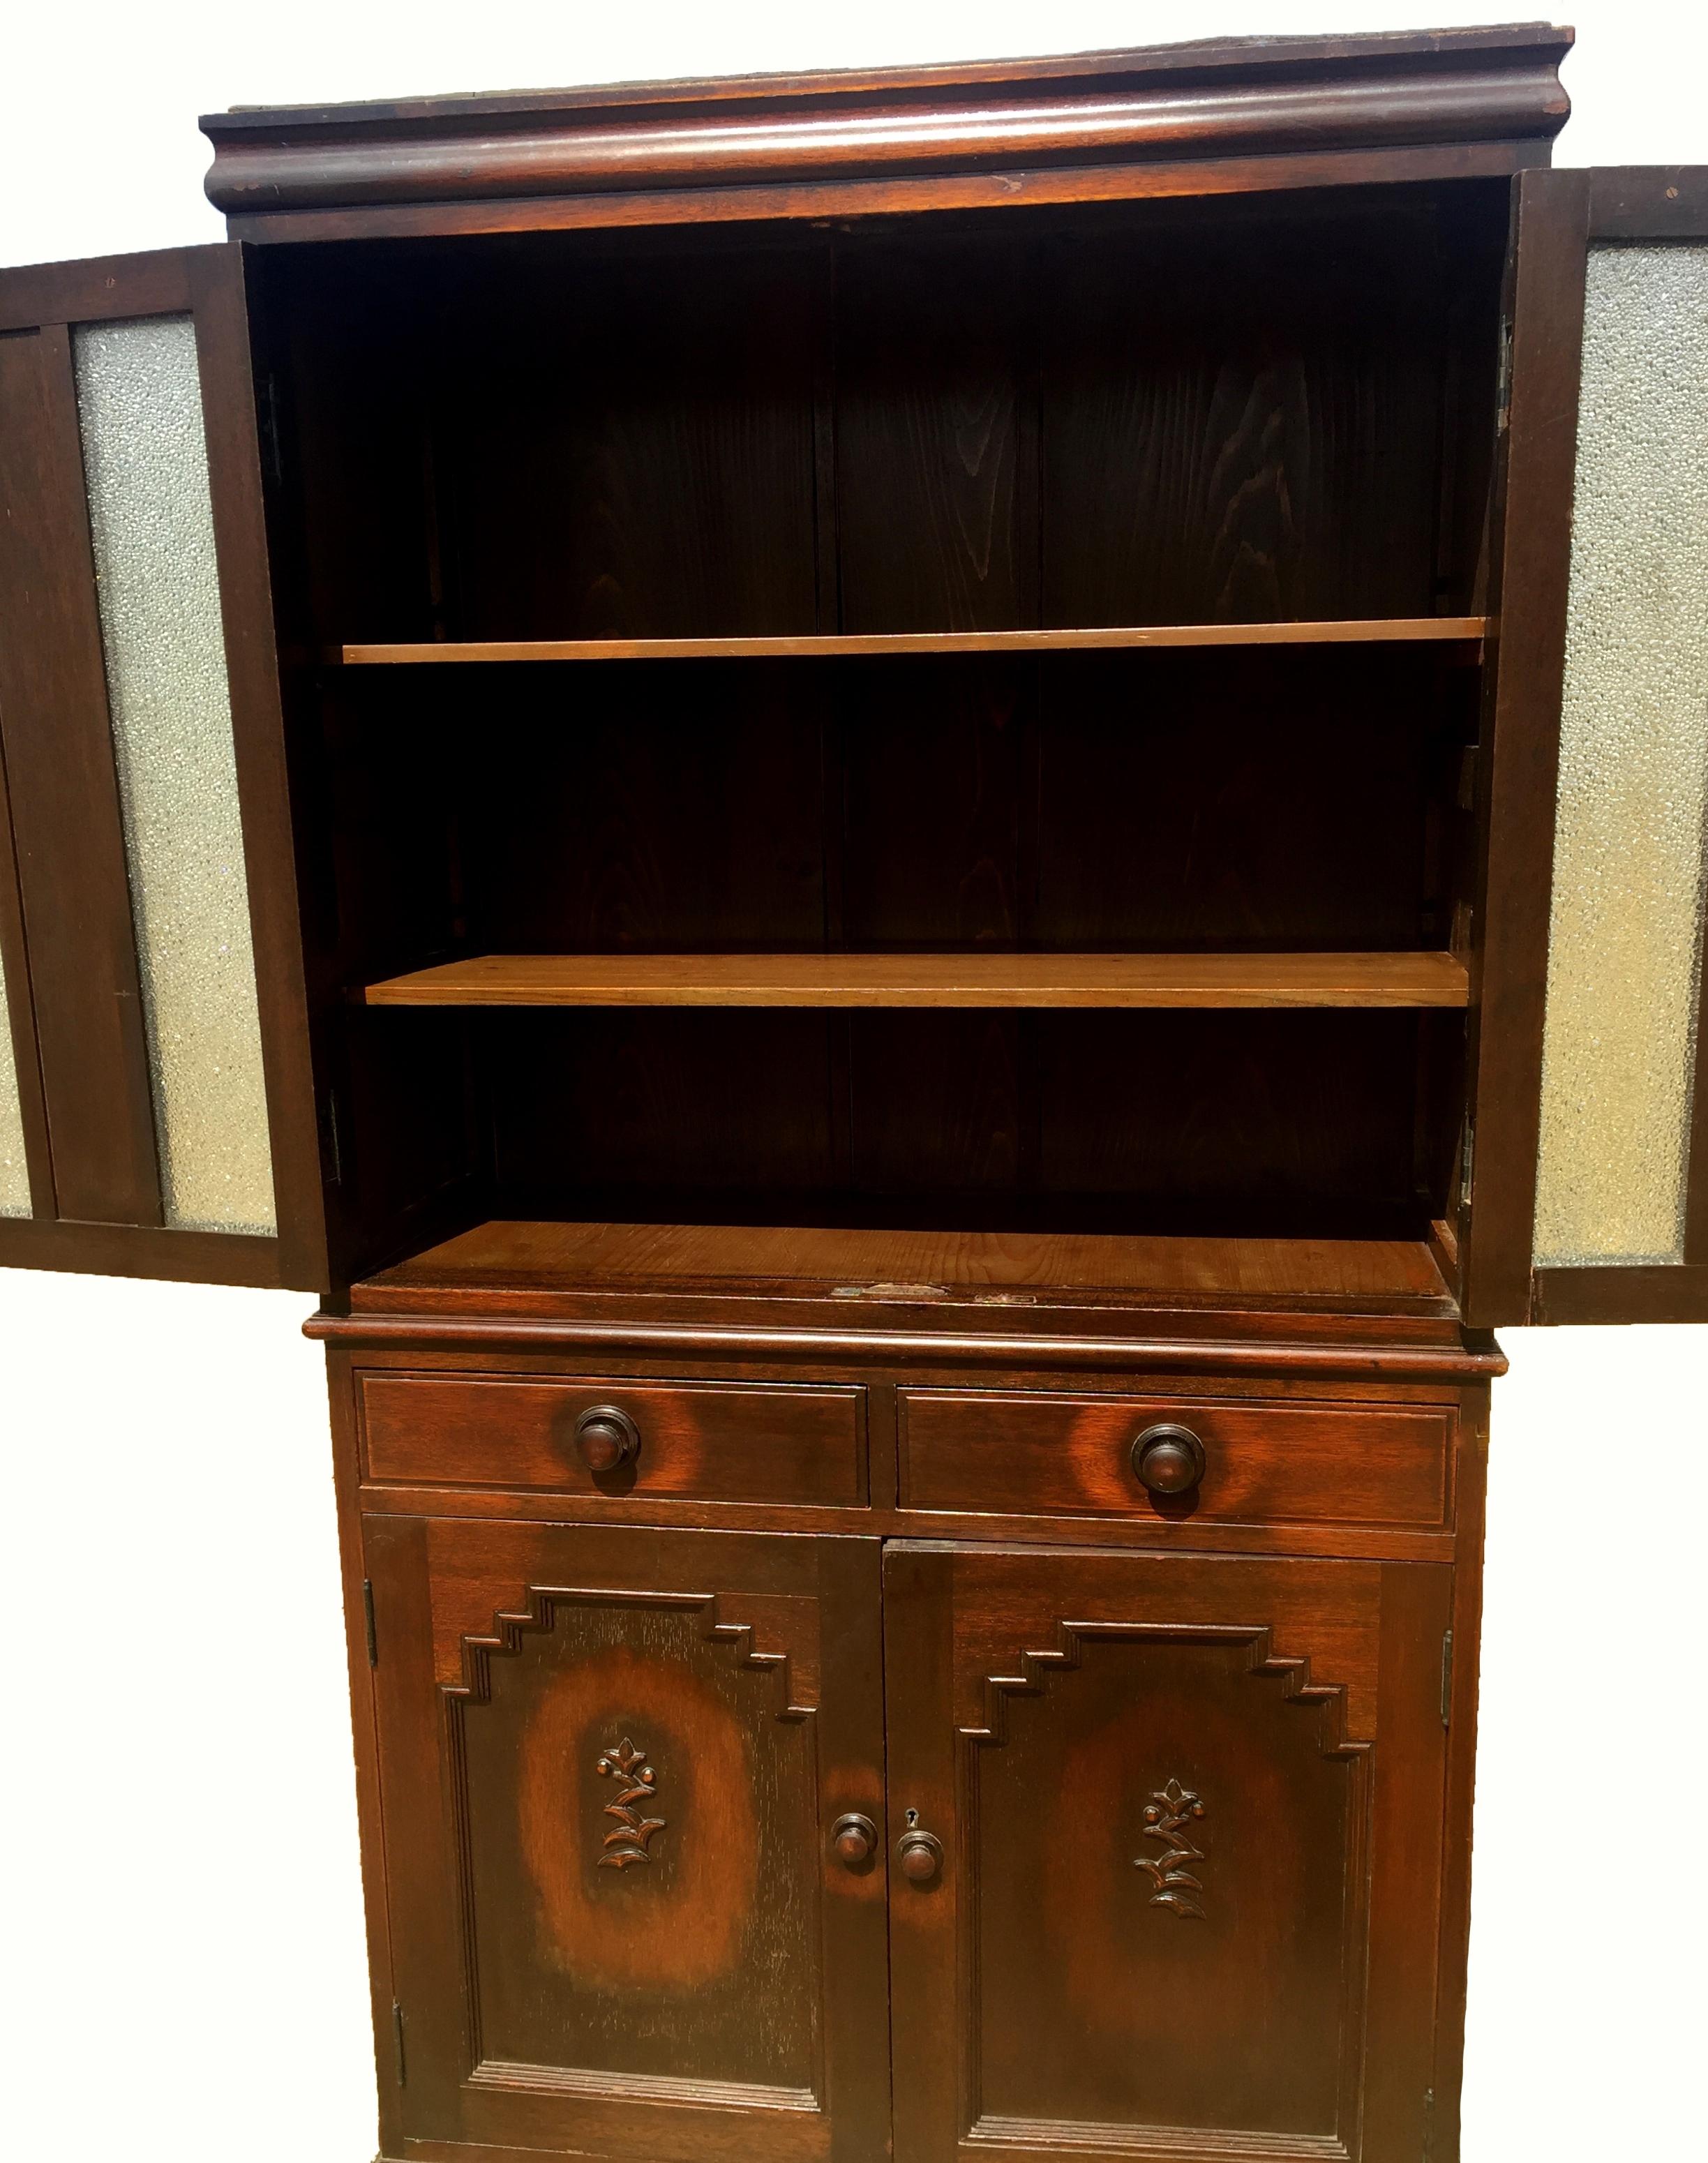 A rare Art Deco style cabinet from the China's republic era. The two tiered cabinet comprises of a lower chest with 2 drawers and 2 shelves, and a top chest with 2 shelves. The top doors with rare diamond glass panels sparkle brilliantly. The lower